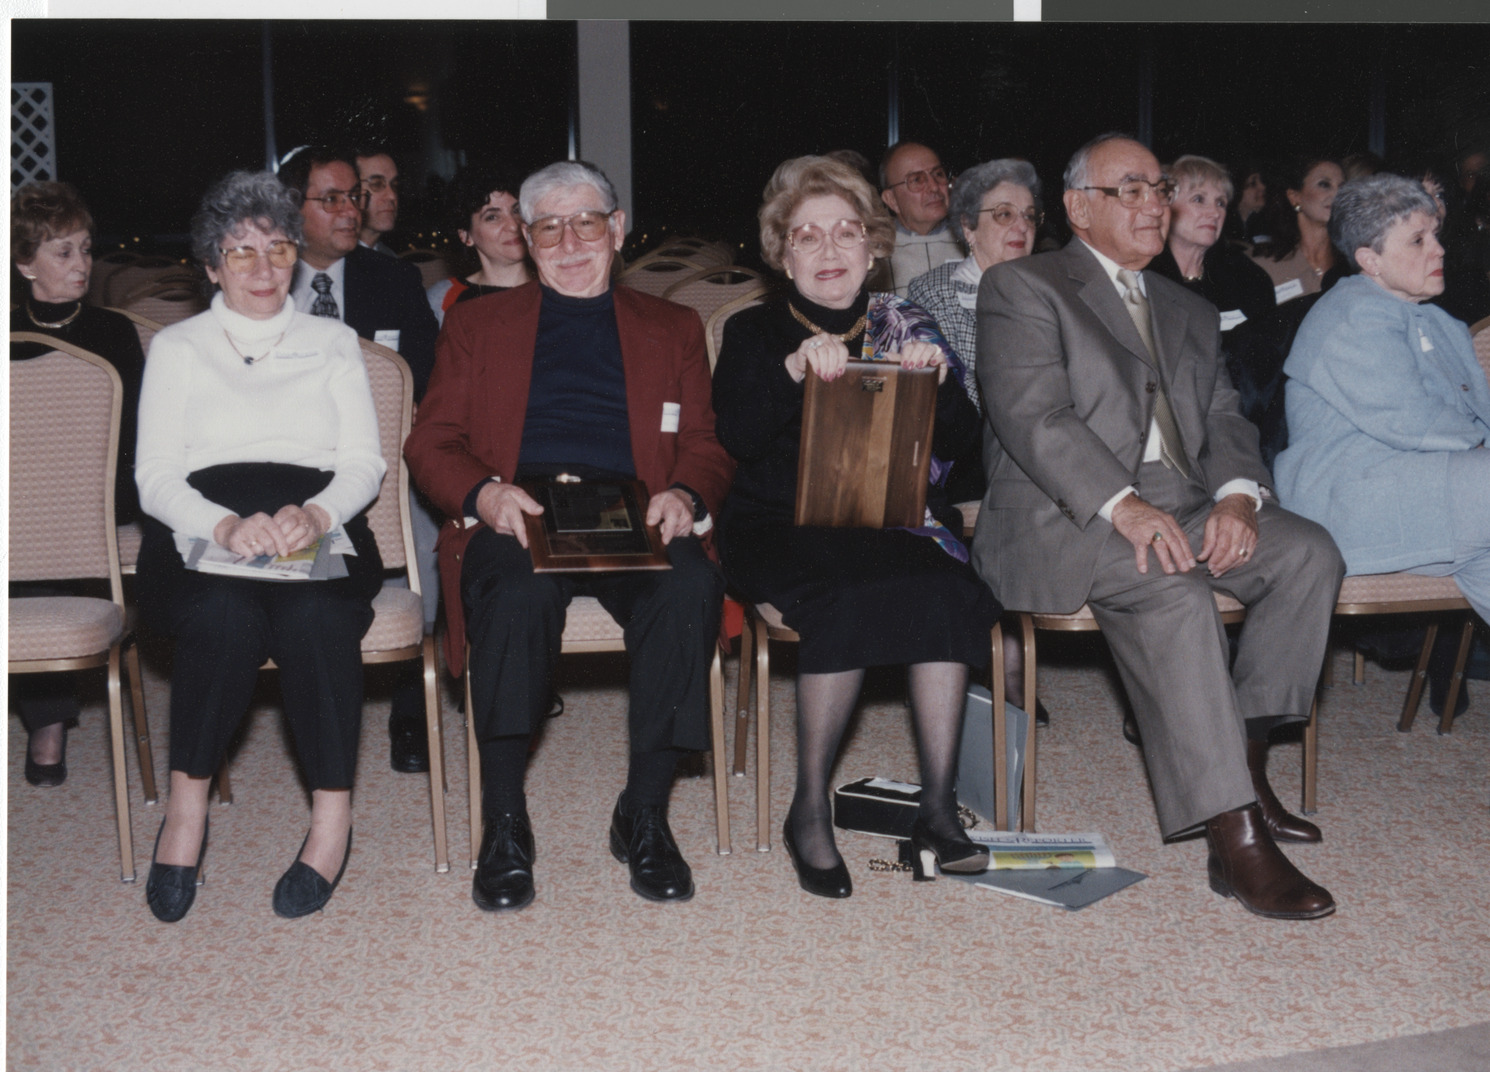 Photograph of preview event at Spanish Trails Country Club, December 1998